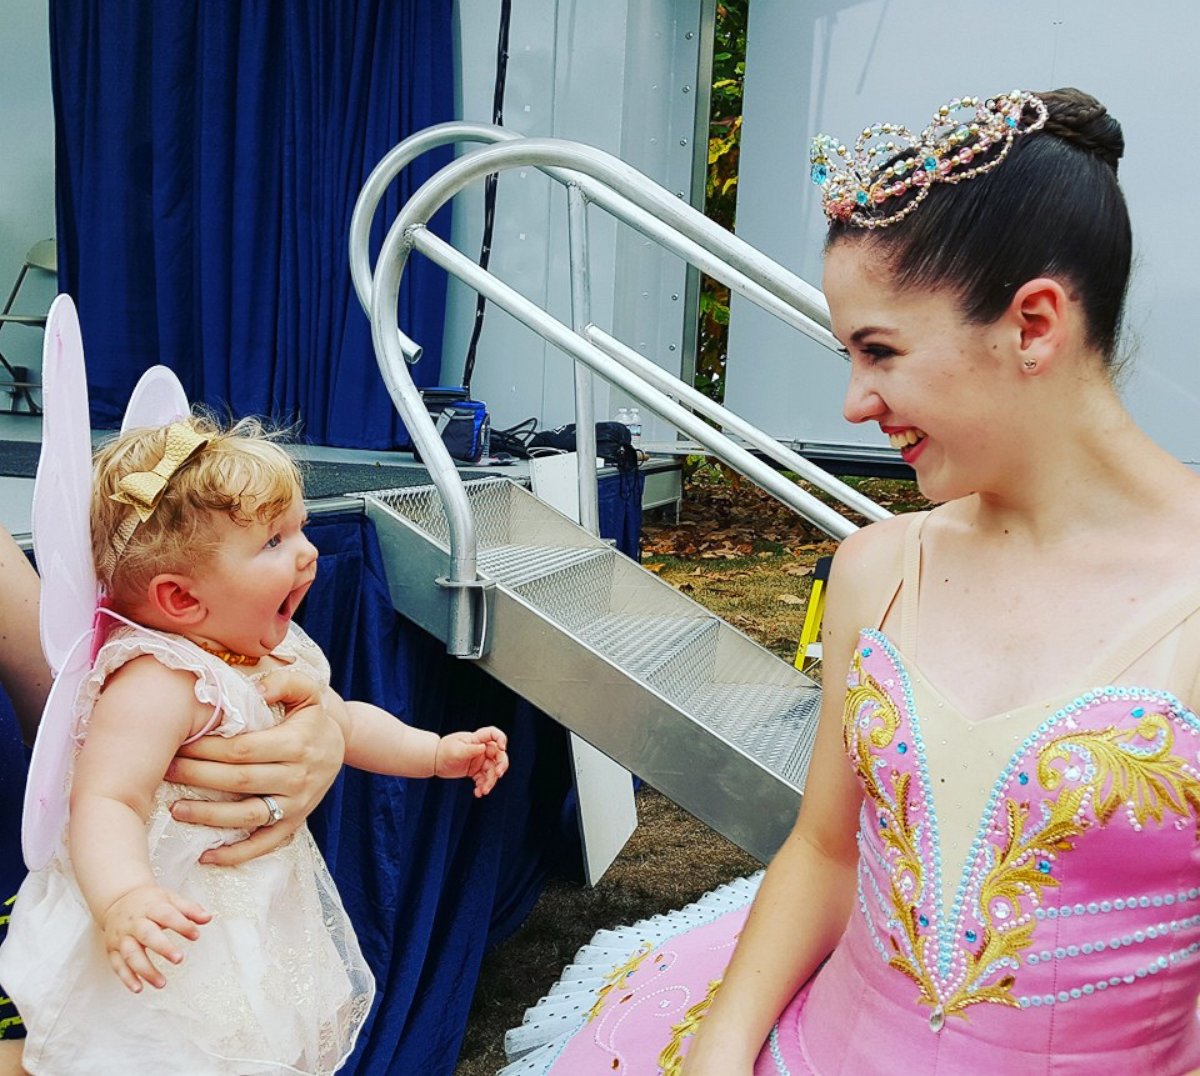 PHOTO: Little Girl's Reaction to Seeing a Ballerina Is Priceless